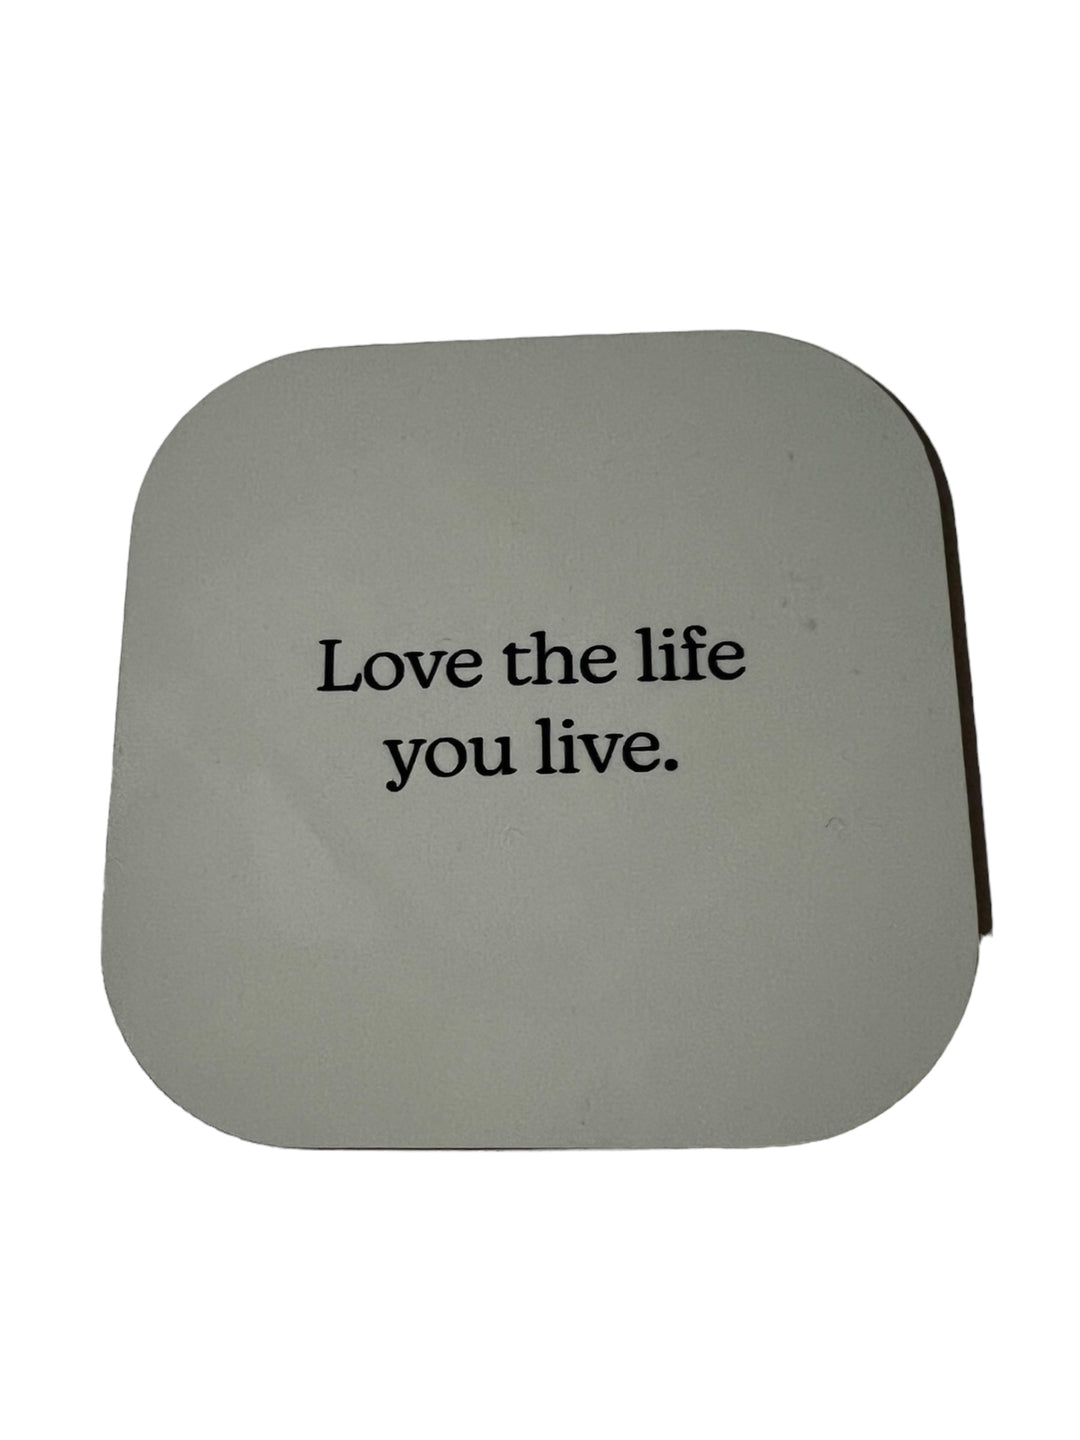 The Quirky Collection Uplifting Coasters